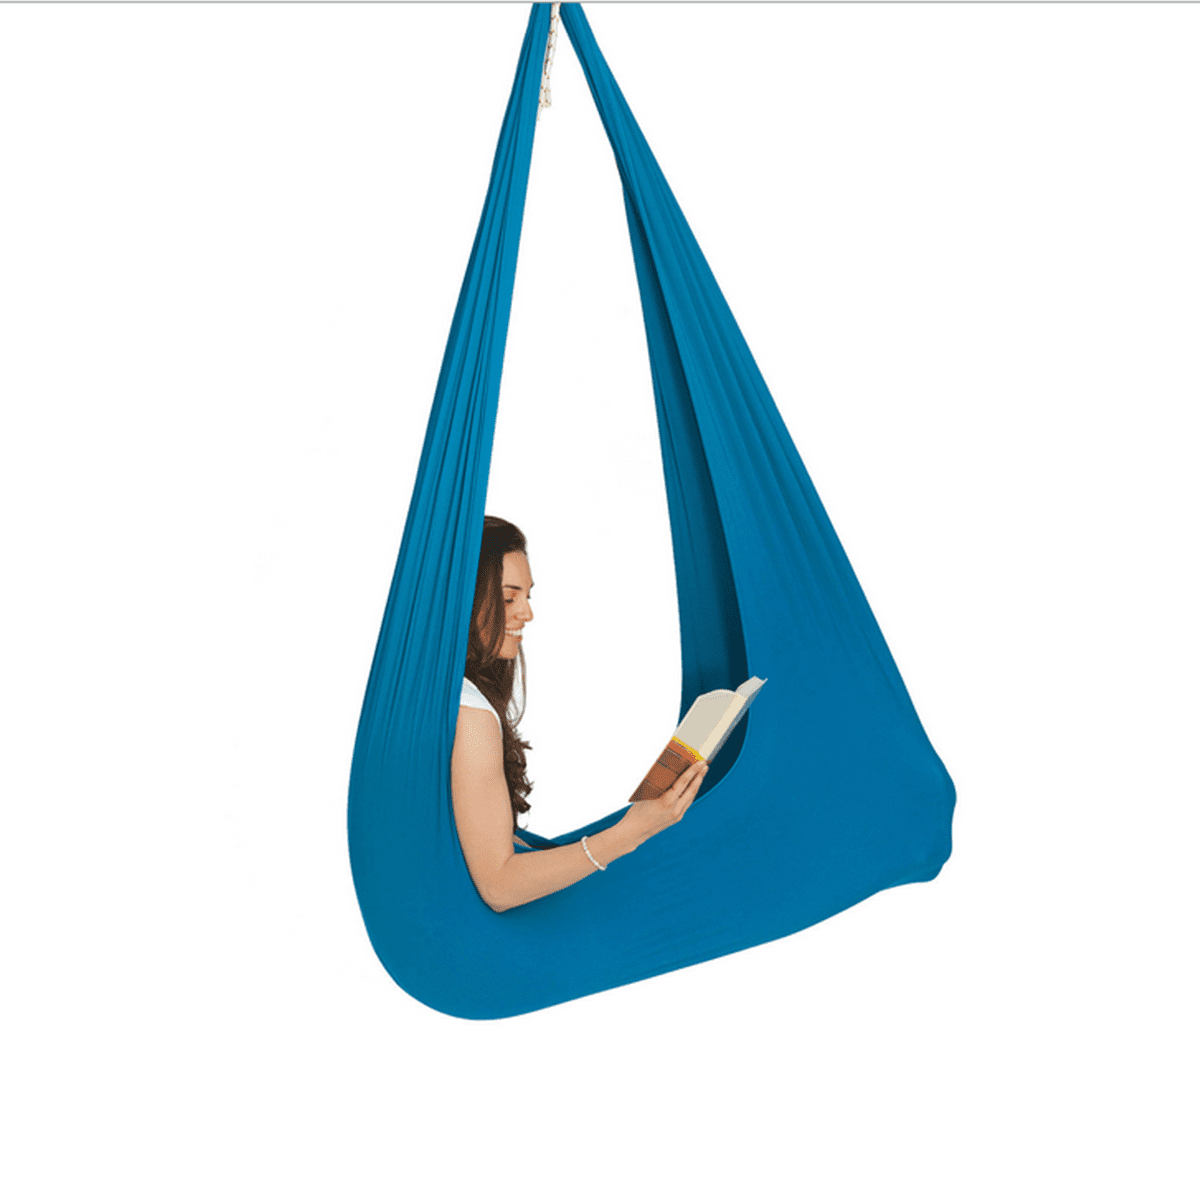 Aspergers Lycra Snuggle Swing Cuddle Hammock for Children with Autism Ideal for Sensory Integration Up to 77lbs, Green Quility Indoor Therapy Swing for Kids with Special Needs ADHD 